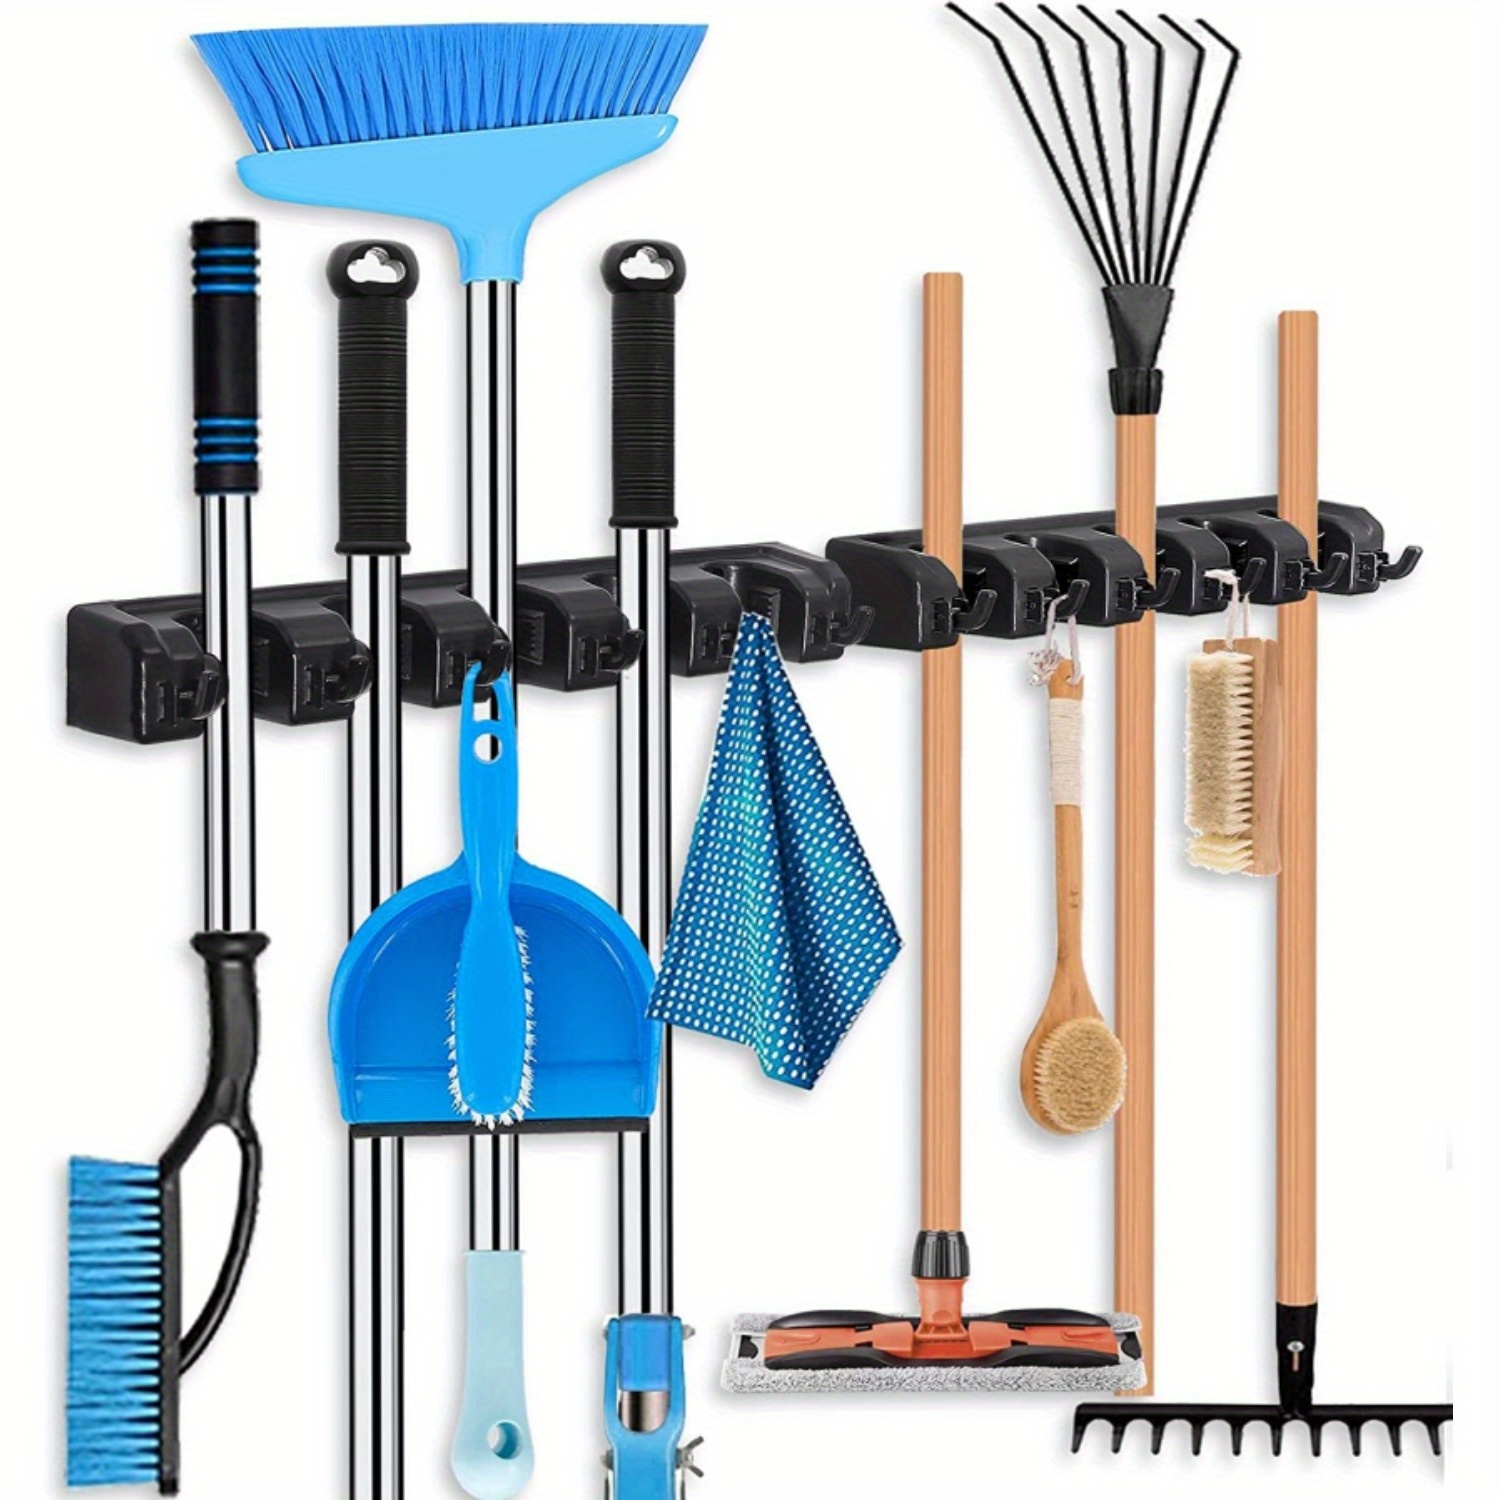 Wudore 5-Layer Wall Mounted Organizer Mop And Broom Holder